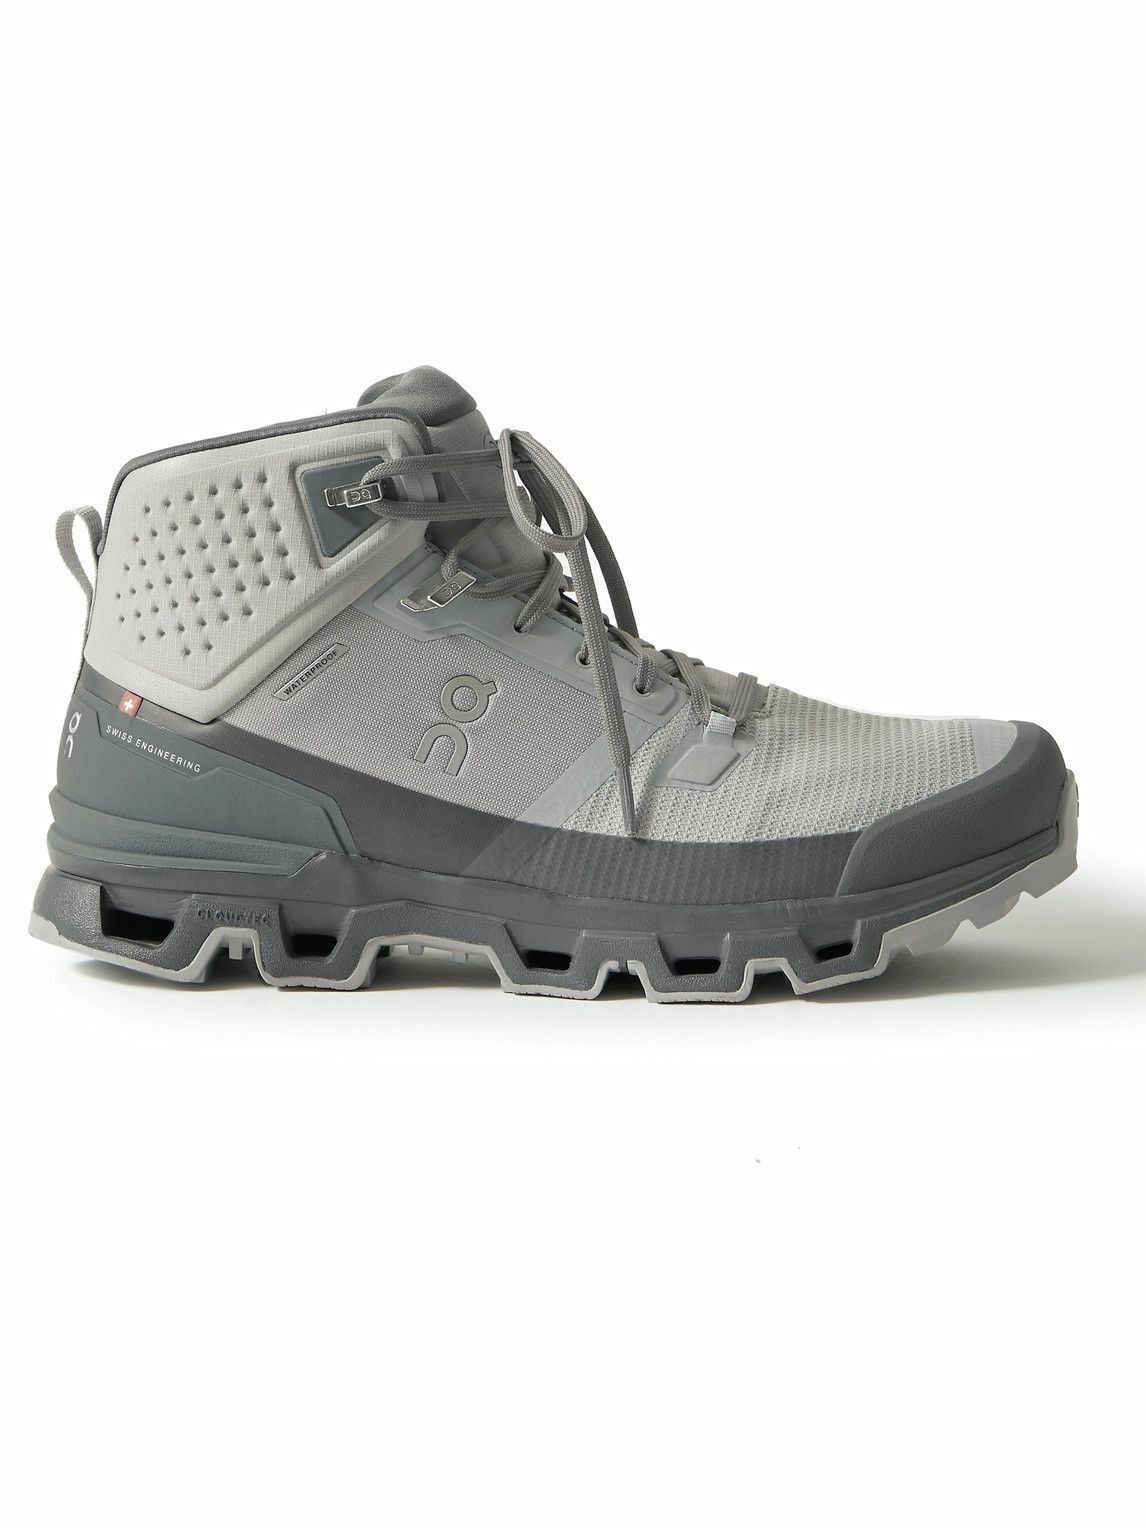 ON - Cloudrock Waterproof Rubber-Trimmed Mesh Boots - Gray On